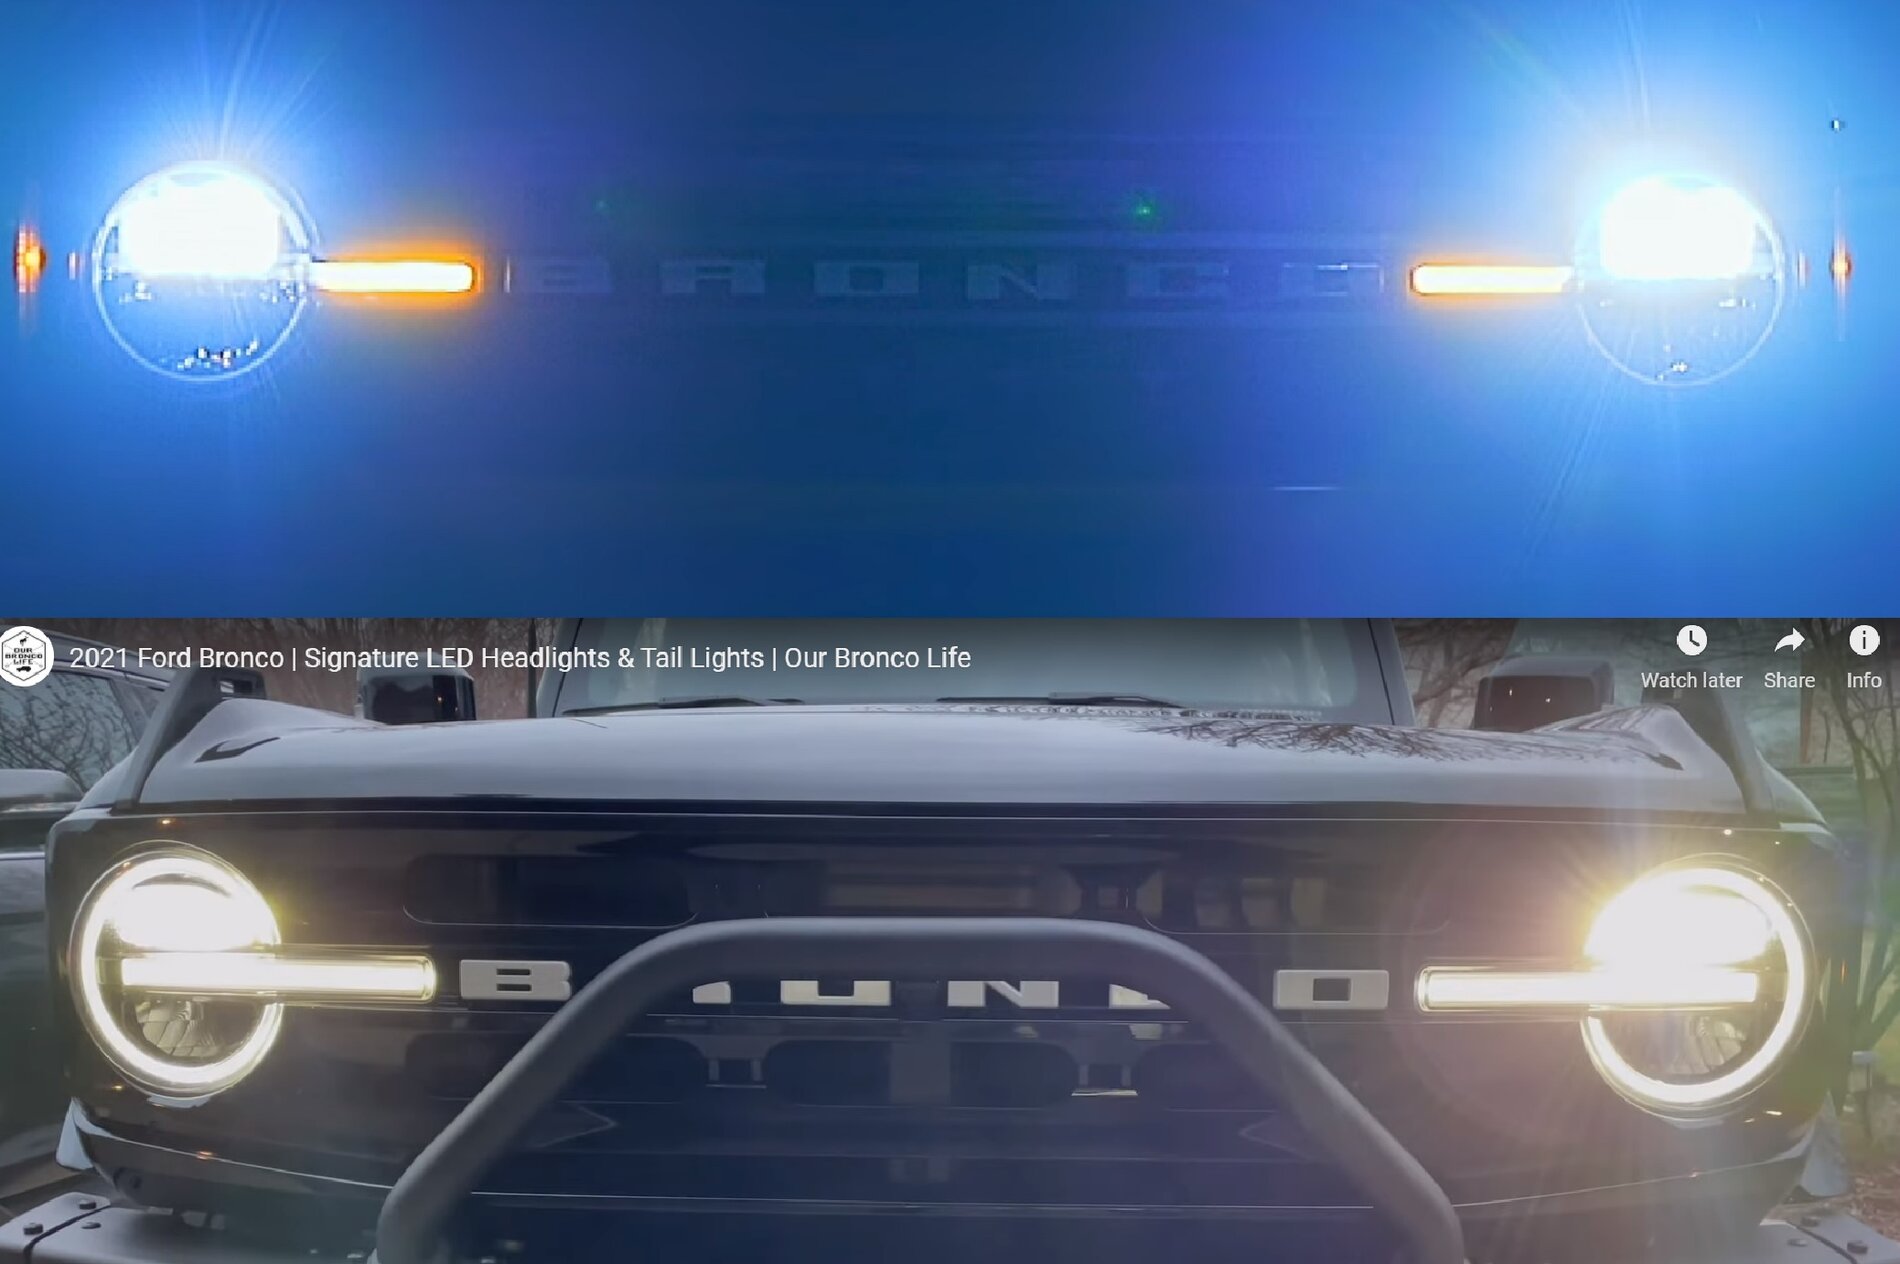 Ford Bronco Signature LED Headlights & Tail Light Modes Video lights